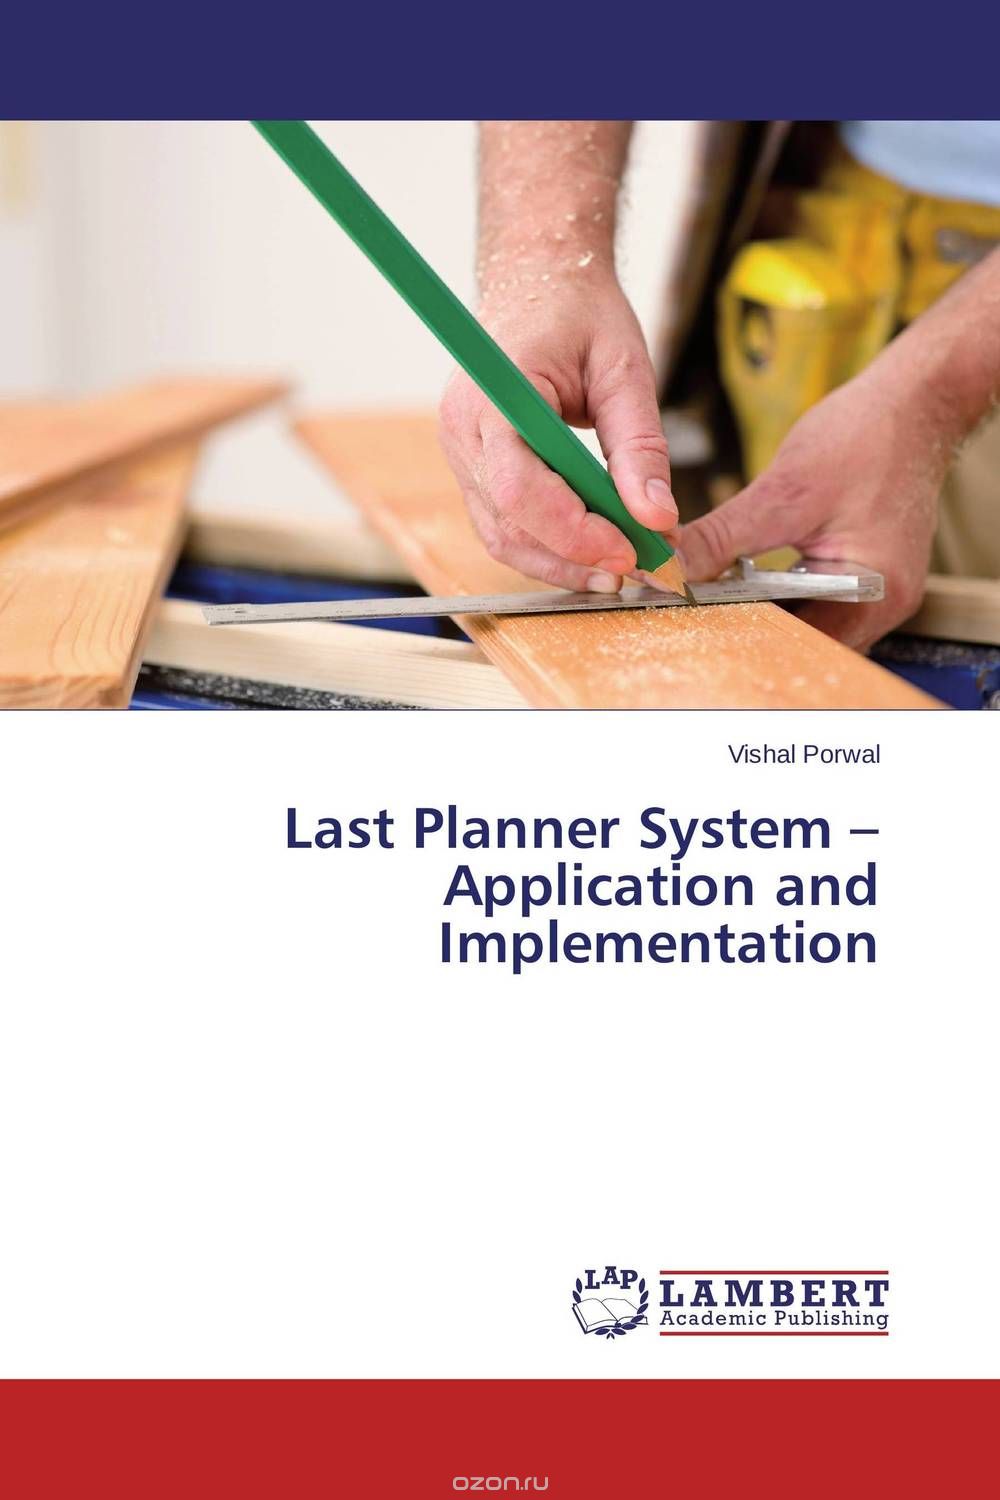 Last Planner System – Application and Implementation